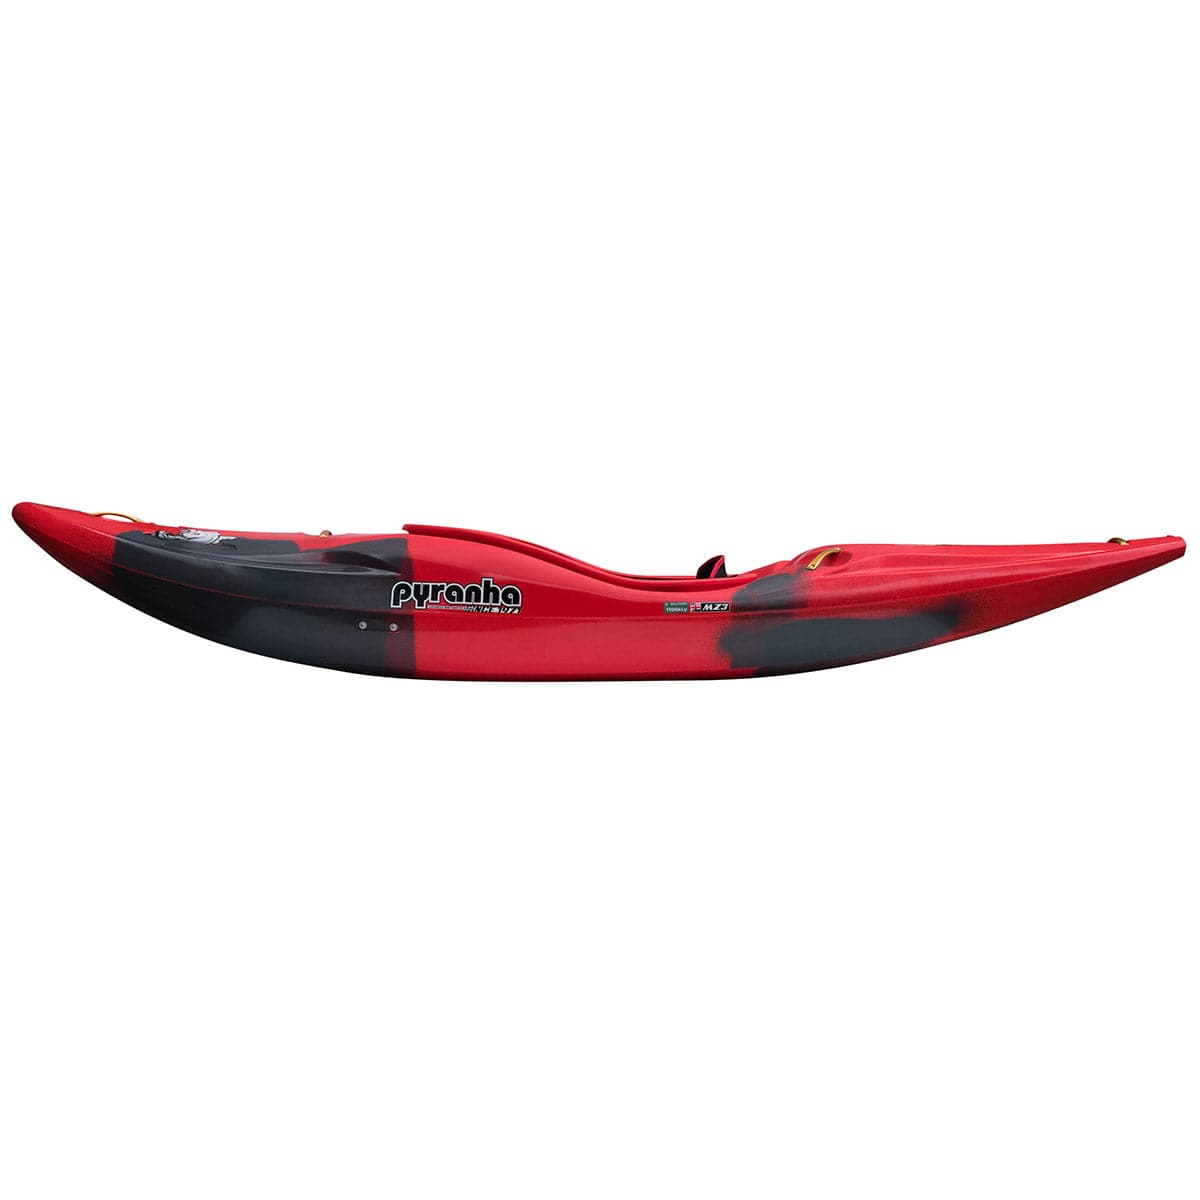 Featuring the Scorch X creek boat, river runner kayak manufactured by Pyranha shown here from a fifth angle.